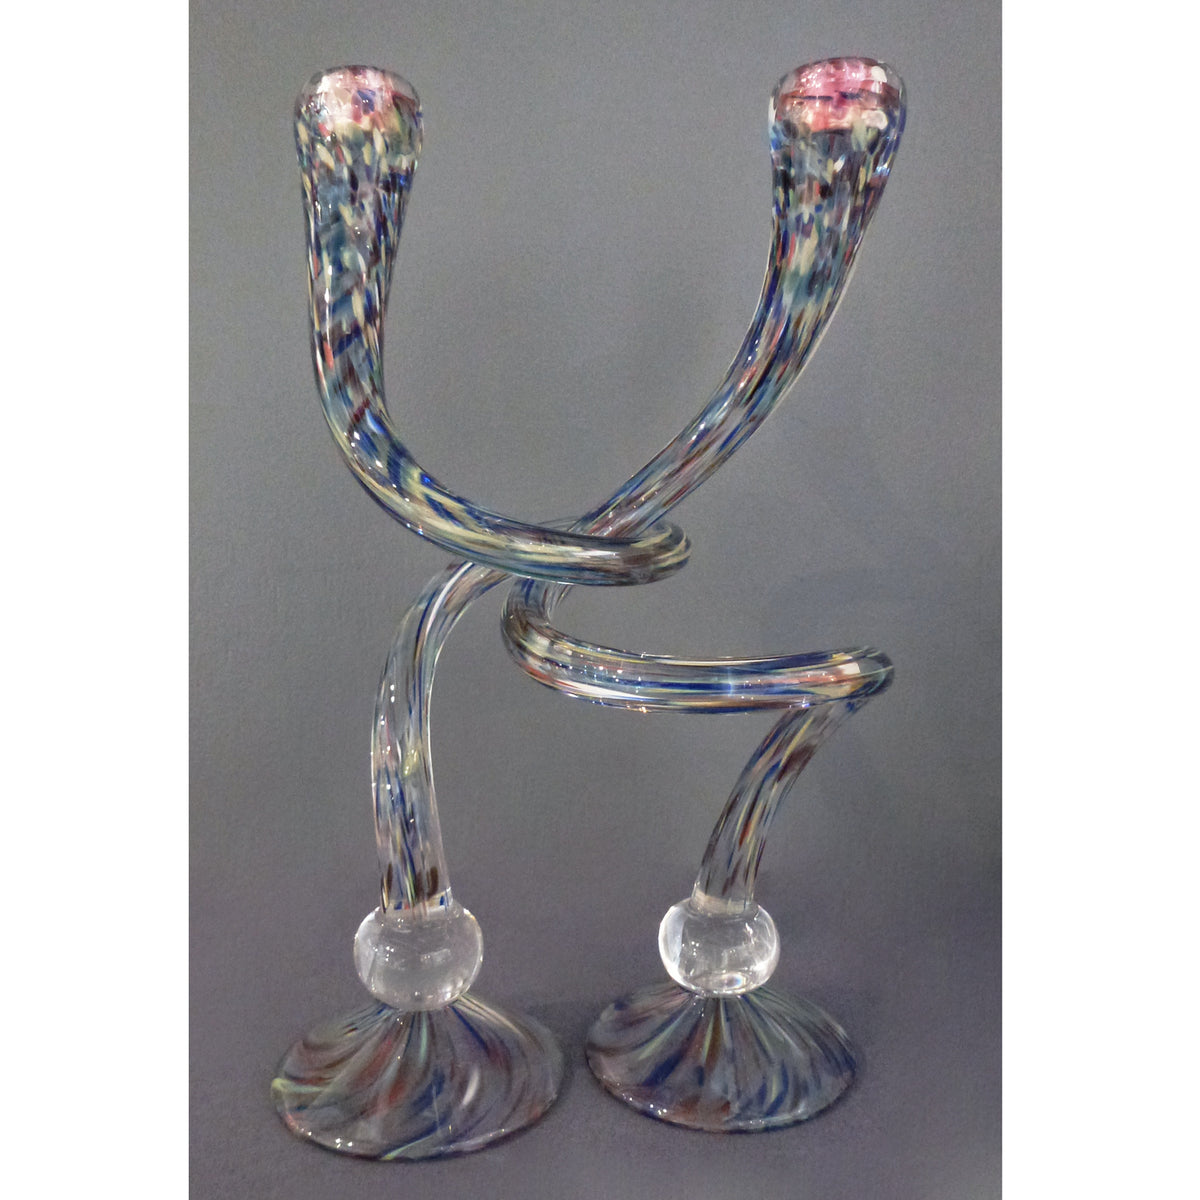 Michael Hudson - Large Footed Candlesticks  confetti clear